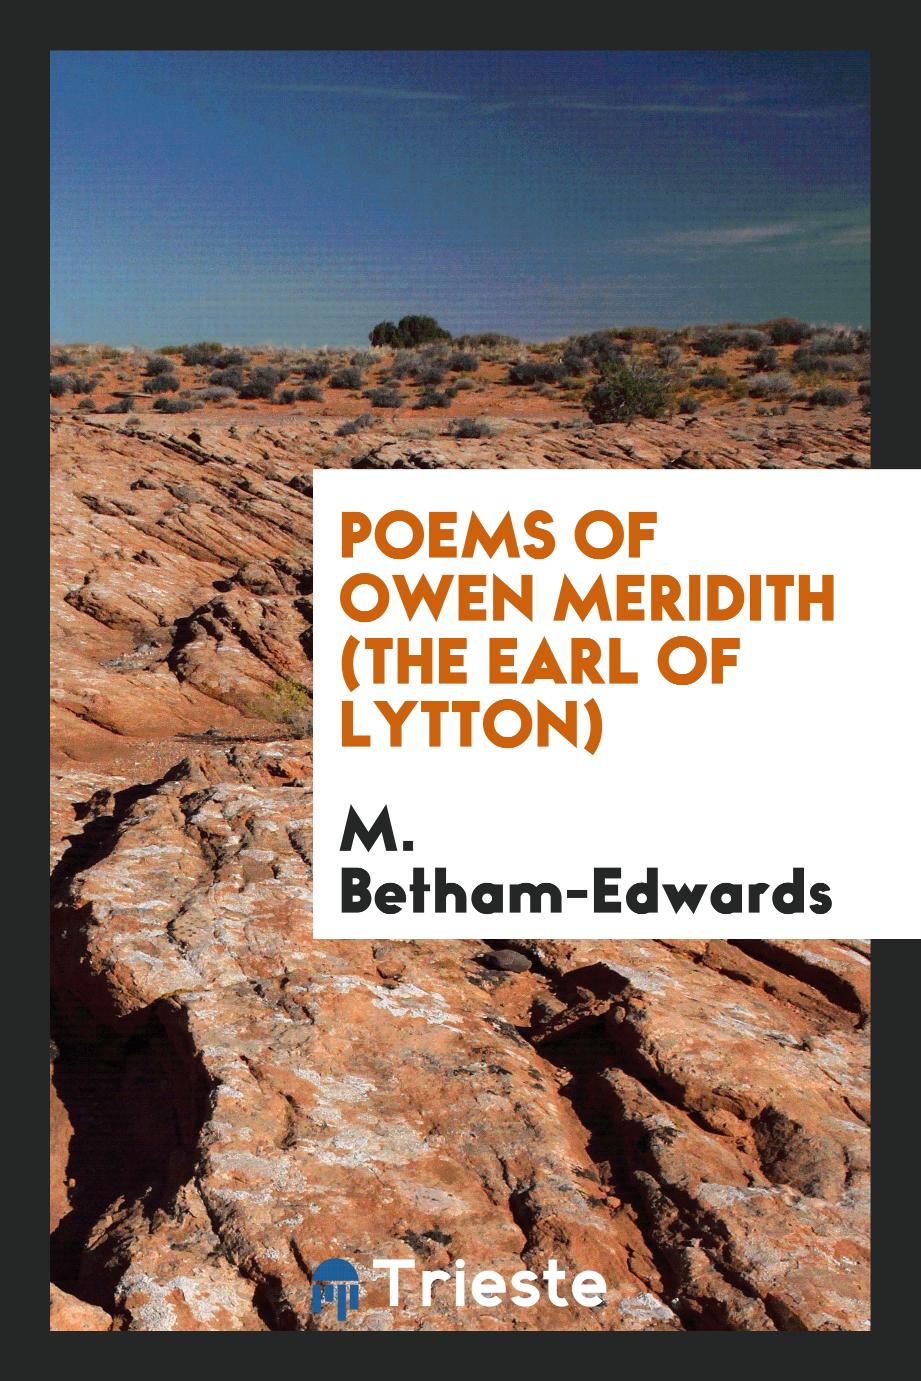 Poems of Owen Meridith (the earl of Lytton)